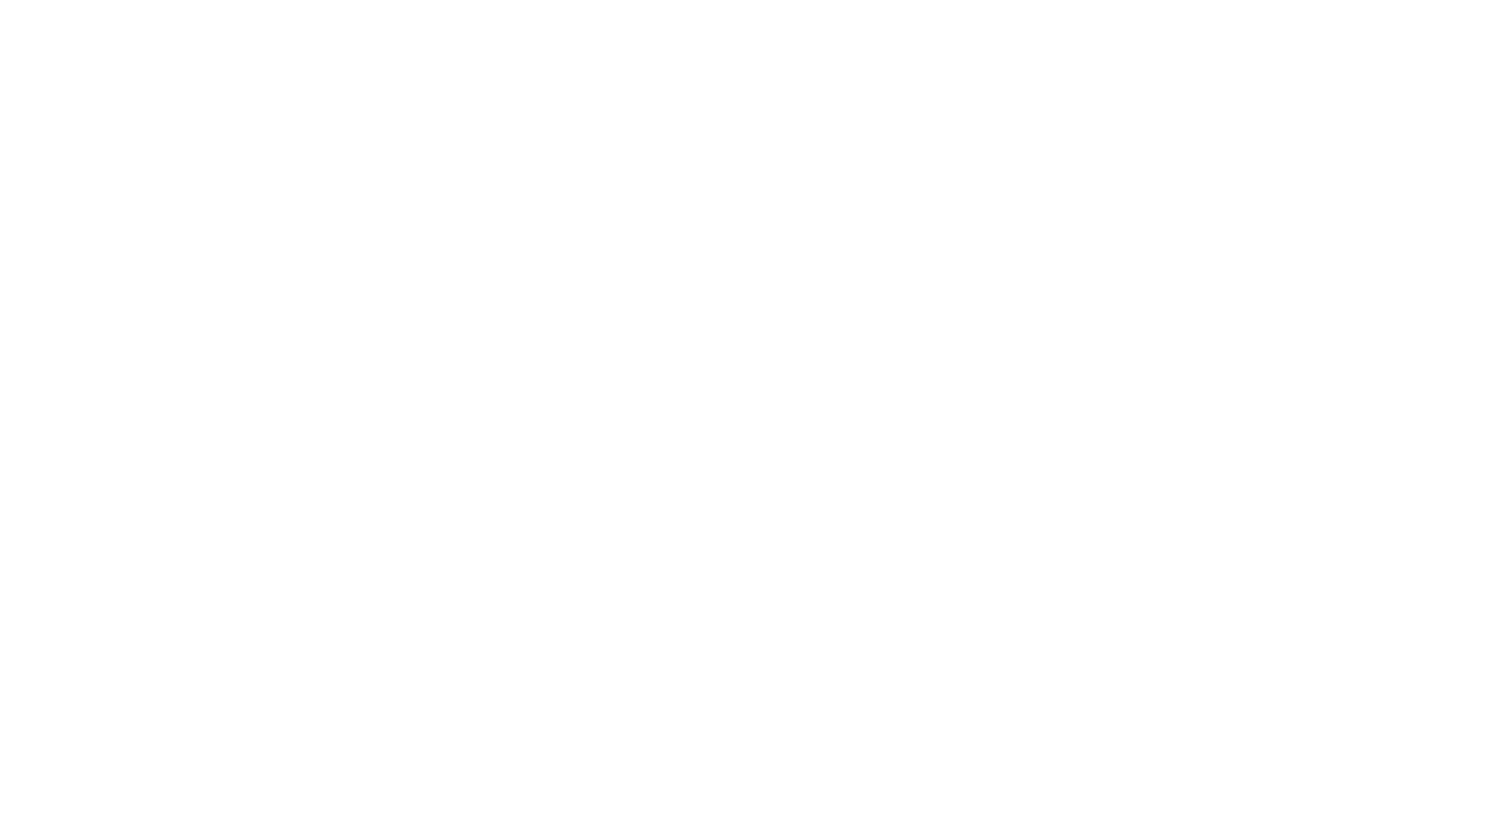 Citywide Capital Limited